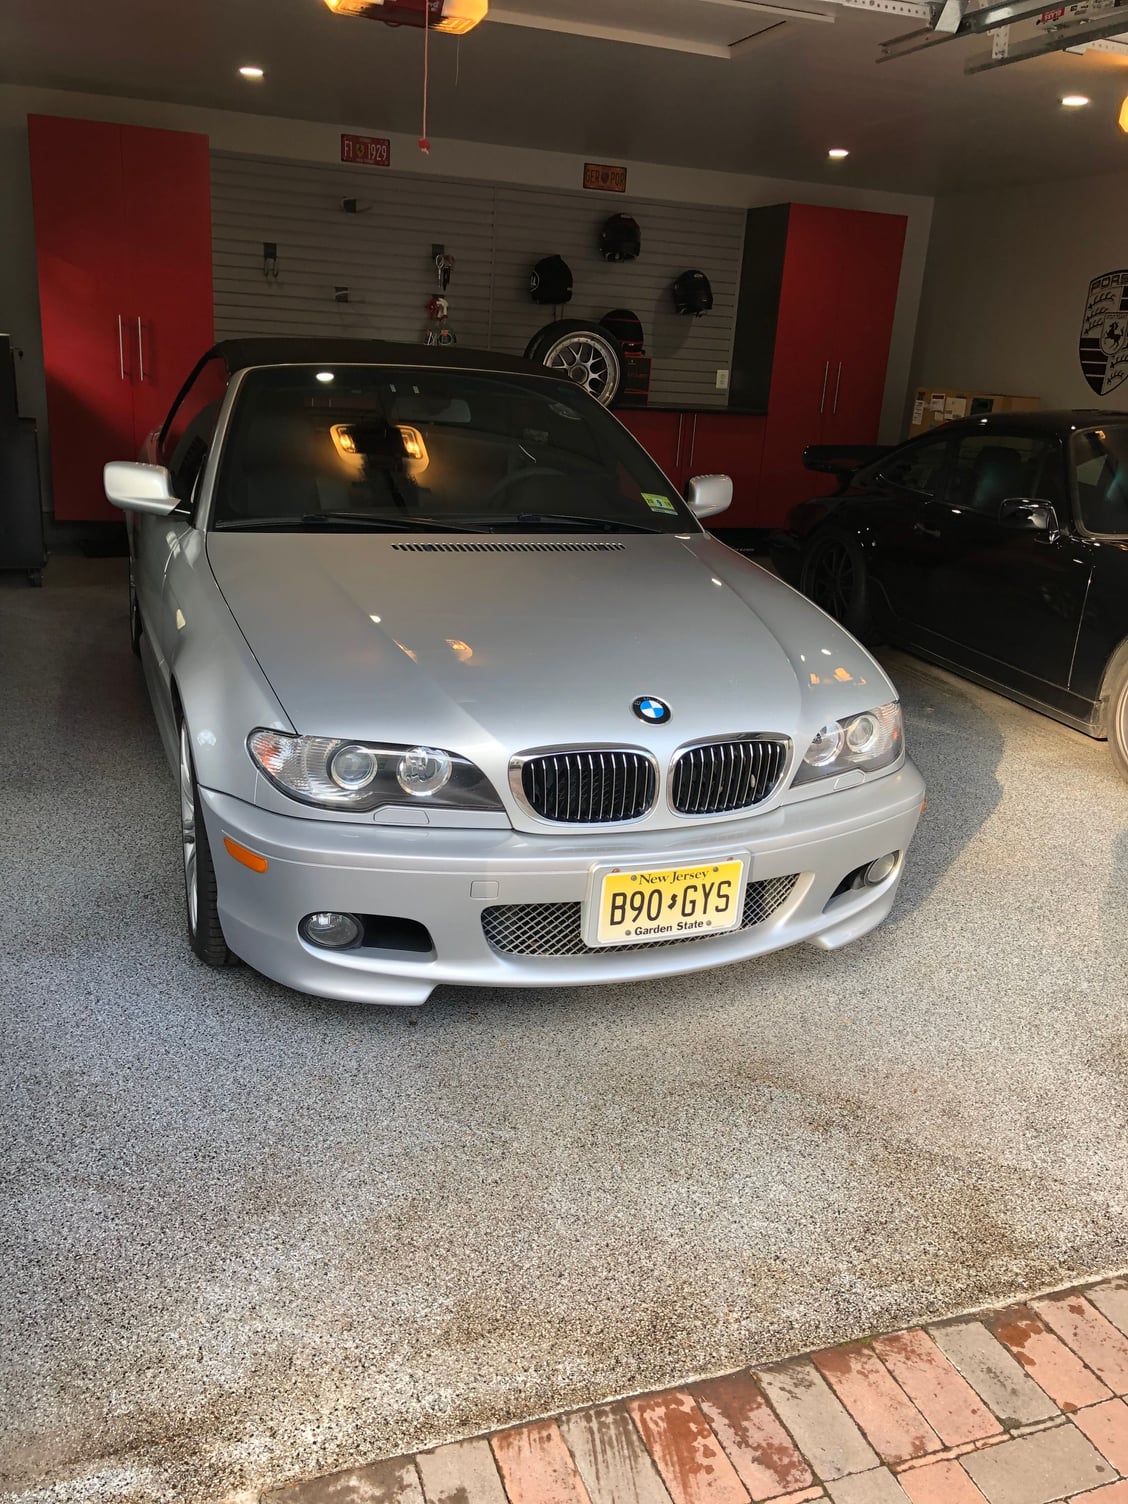 2006 BMW 330Ci - 2006 BMW 330 ZHP convertible - Used - VIN WBABW53436PZ31250 - 87,450 Miles - 6 cyl - 2WD - Automatic - Convertible - Silver - Moorestown, NJ 08057, United States